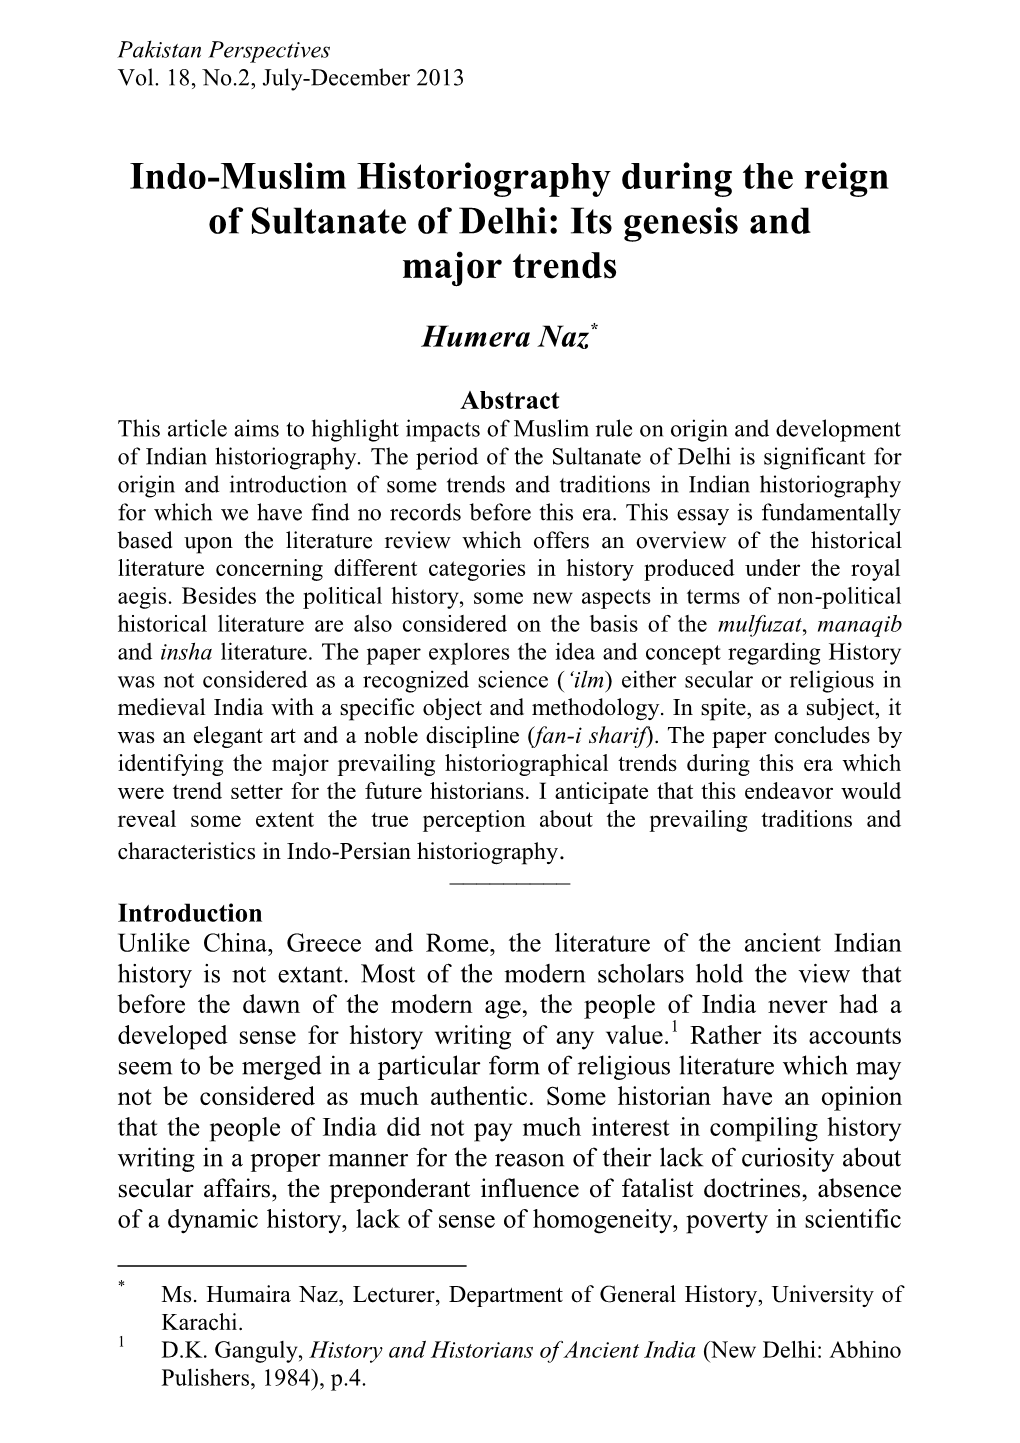 Indo-Muslim Historiography During the Reign of Sultanate of Delhi: Its Genesis and Major Trends